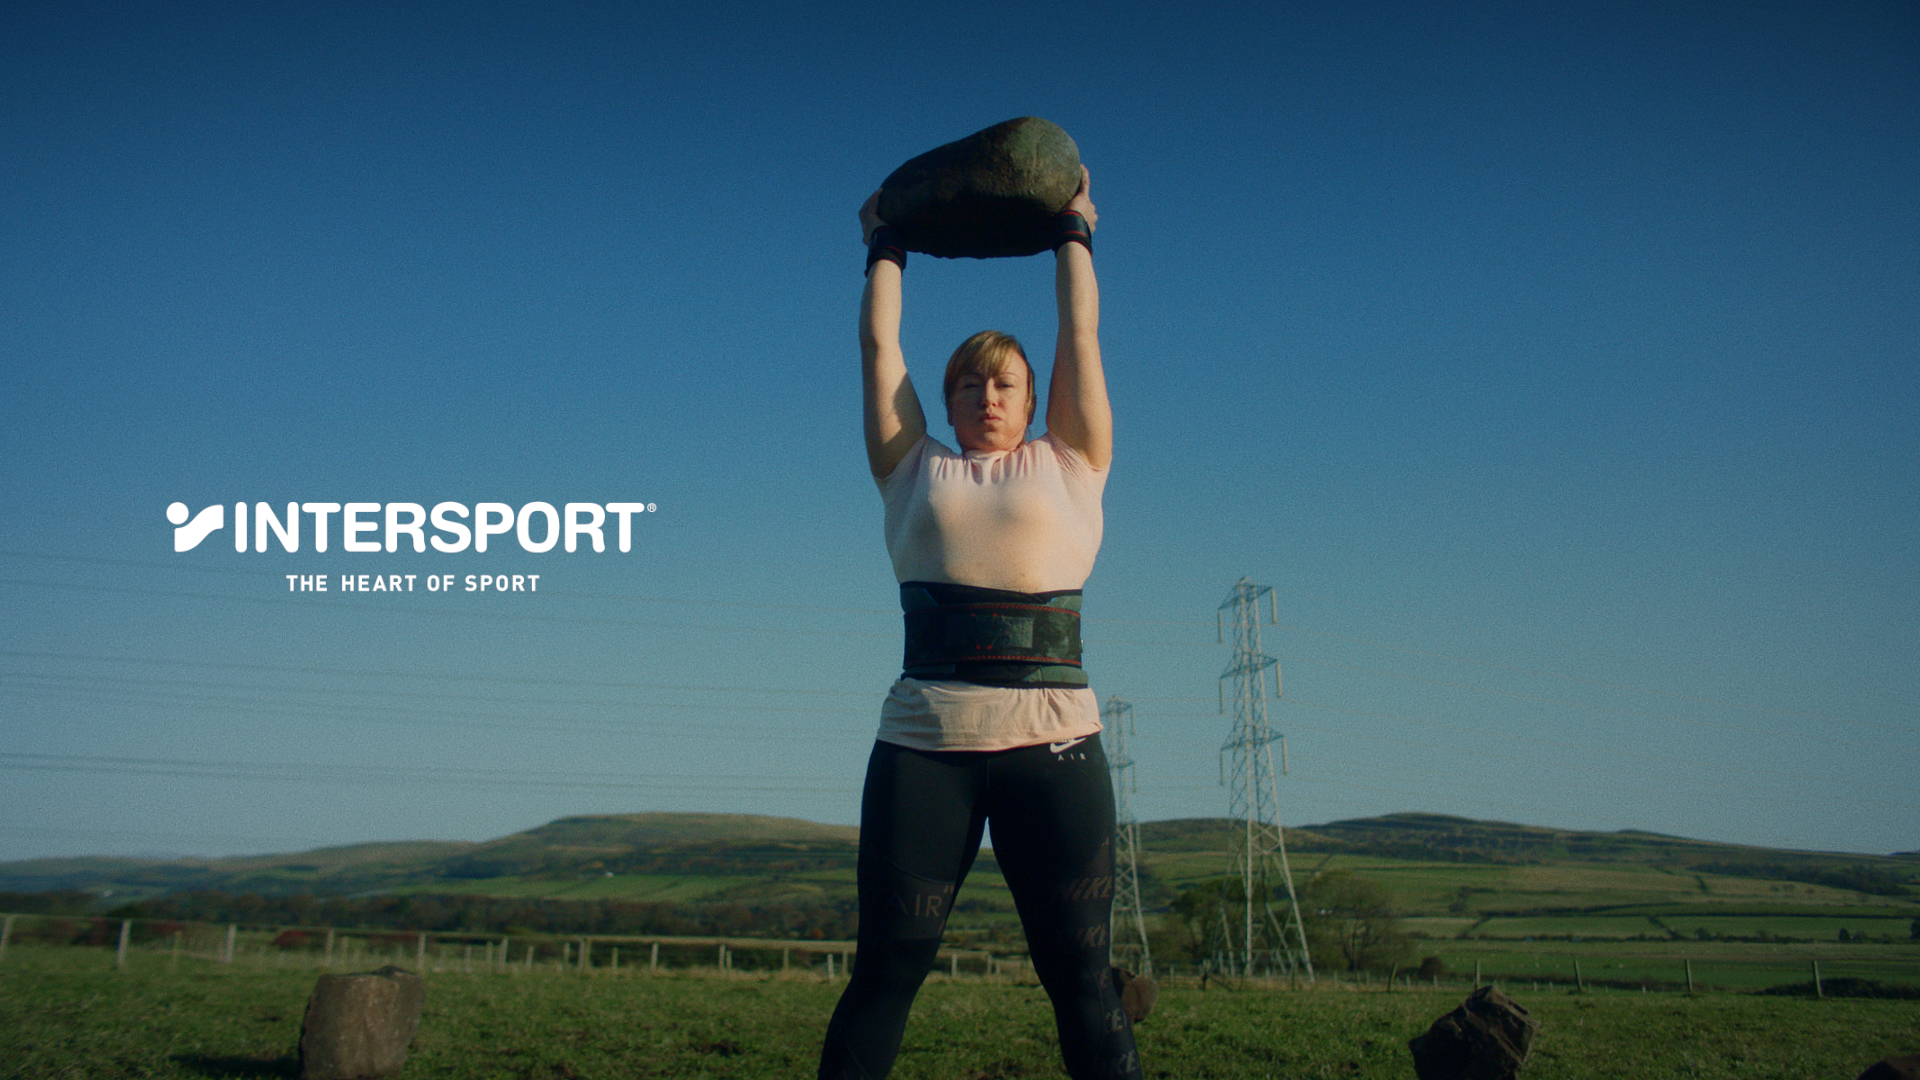 Intersport Launches Mission to Help People Find Their Place in Sport